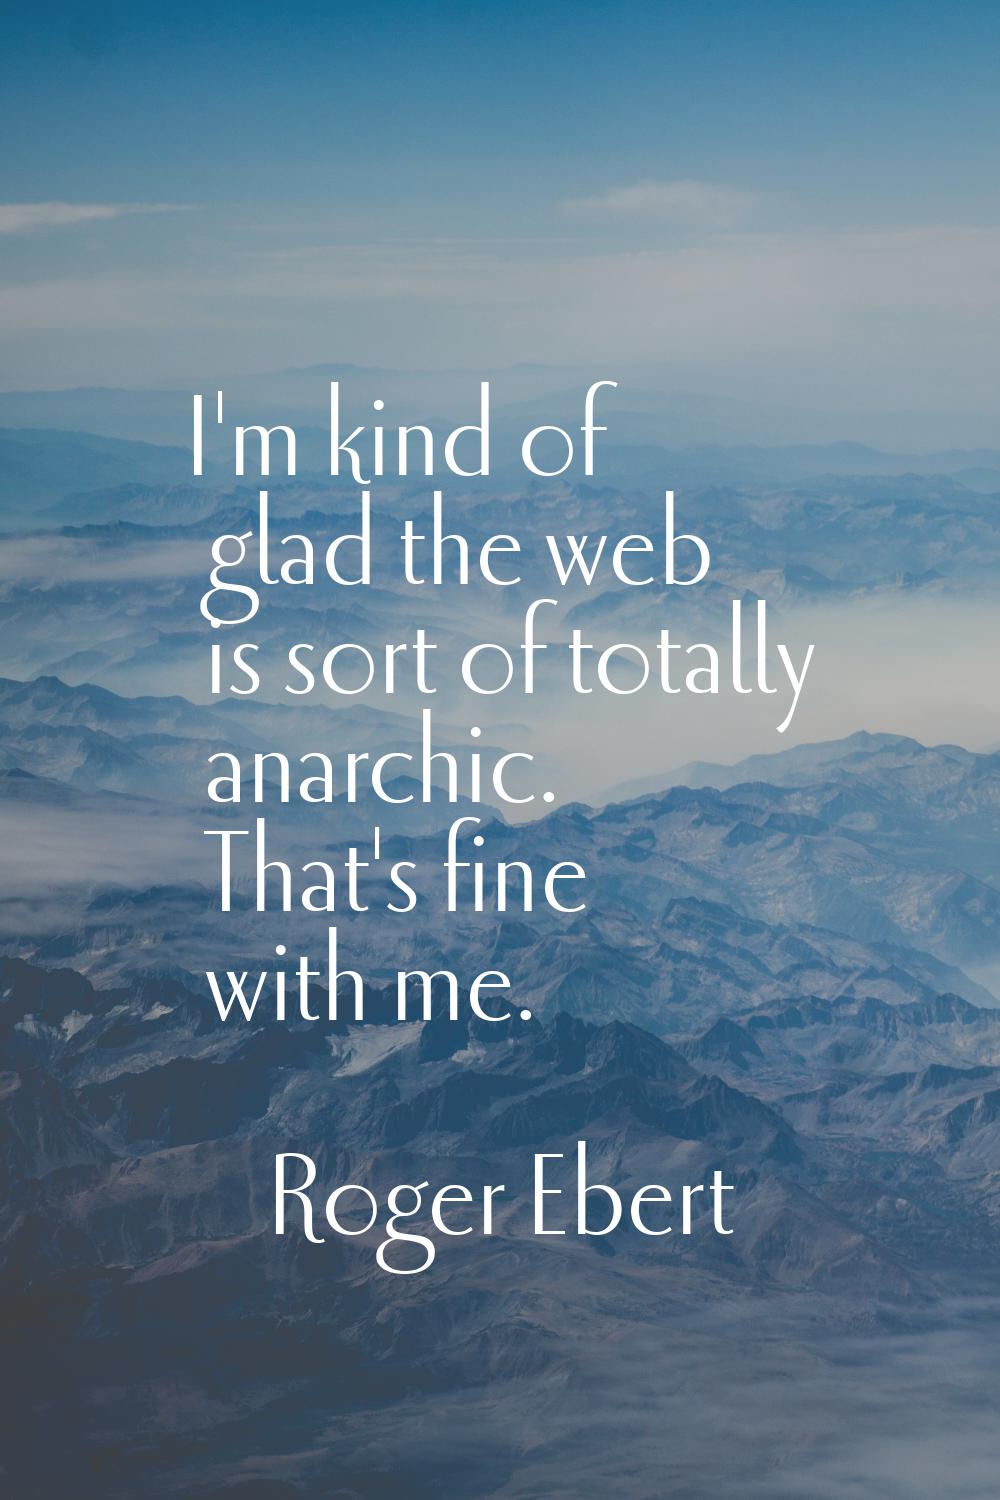 I'm kind of glad the web is sort of totally anarchic. That's fine with me.